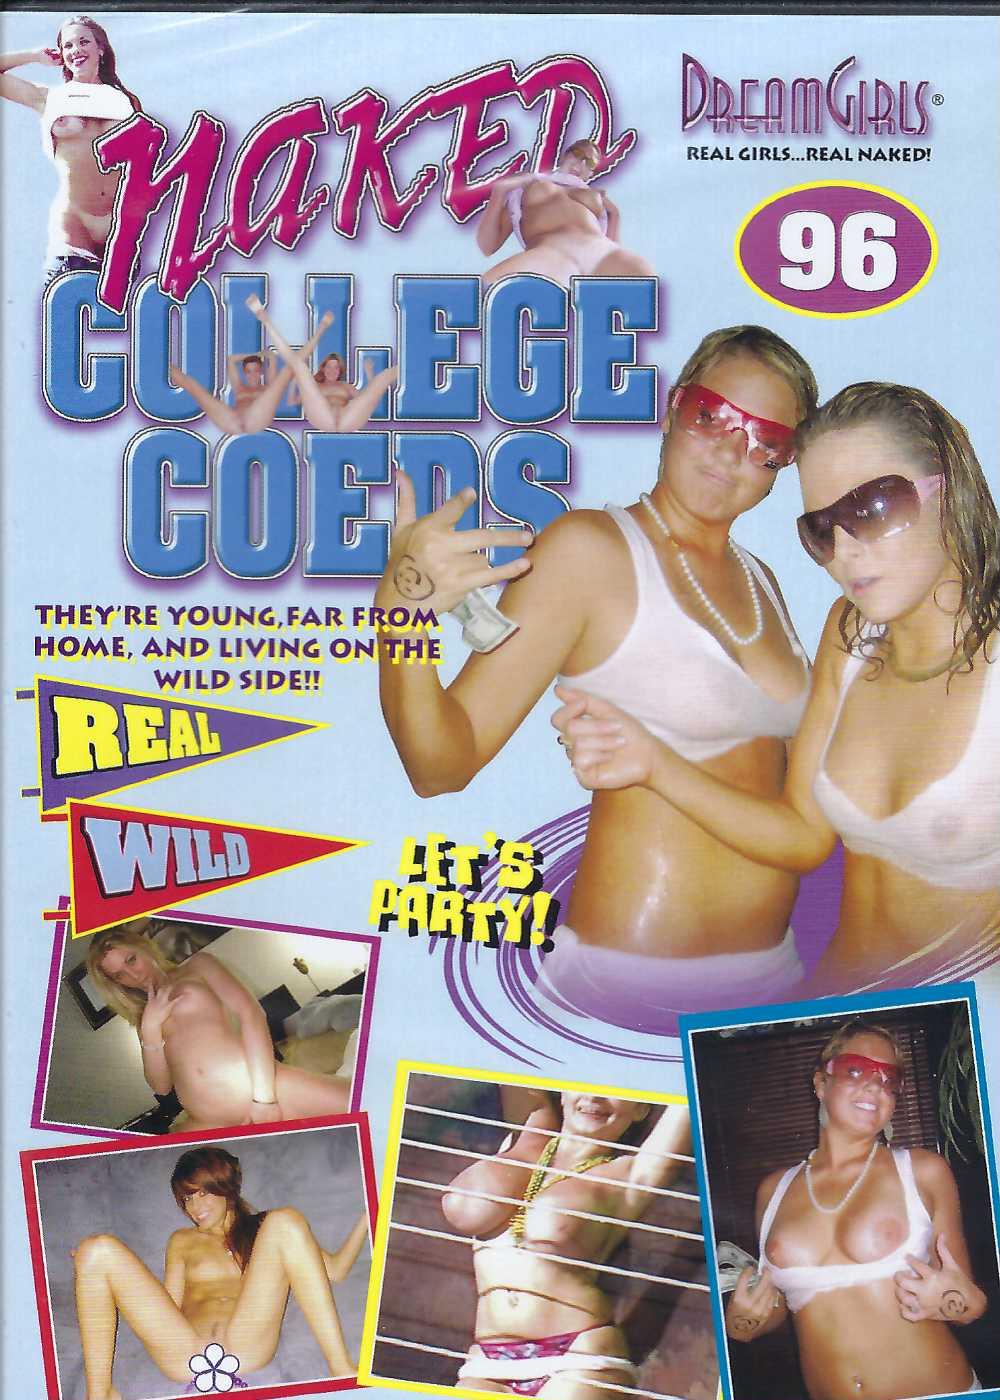 Naked College Coeds 96 Softcore Erotic DVD [DVD] - $5.95 : Cinema Concepts  Video, Unique, High Quality Adult Porn Videos